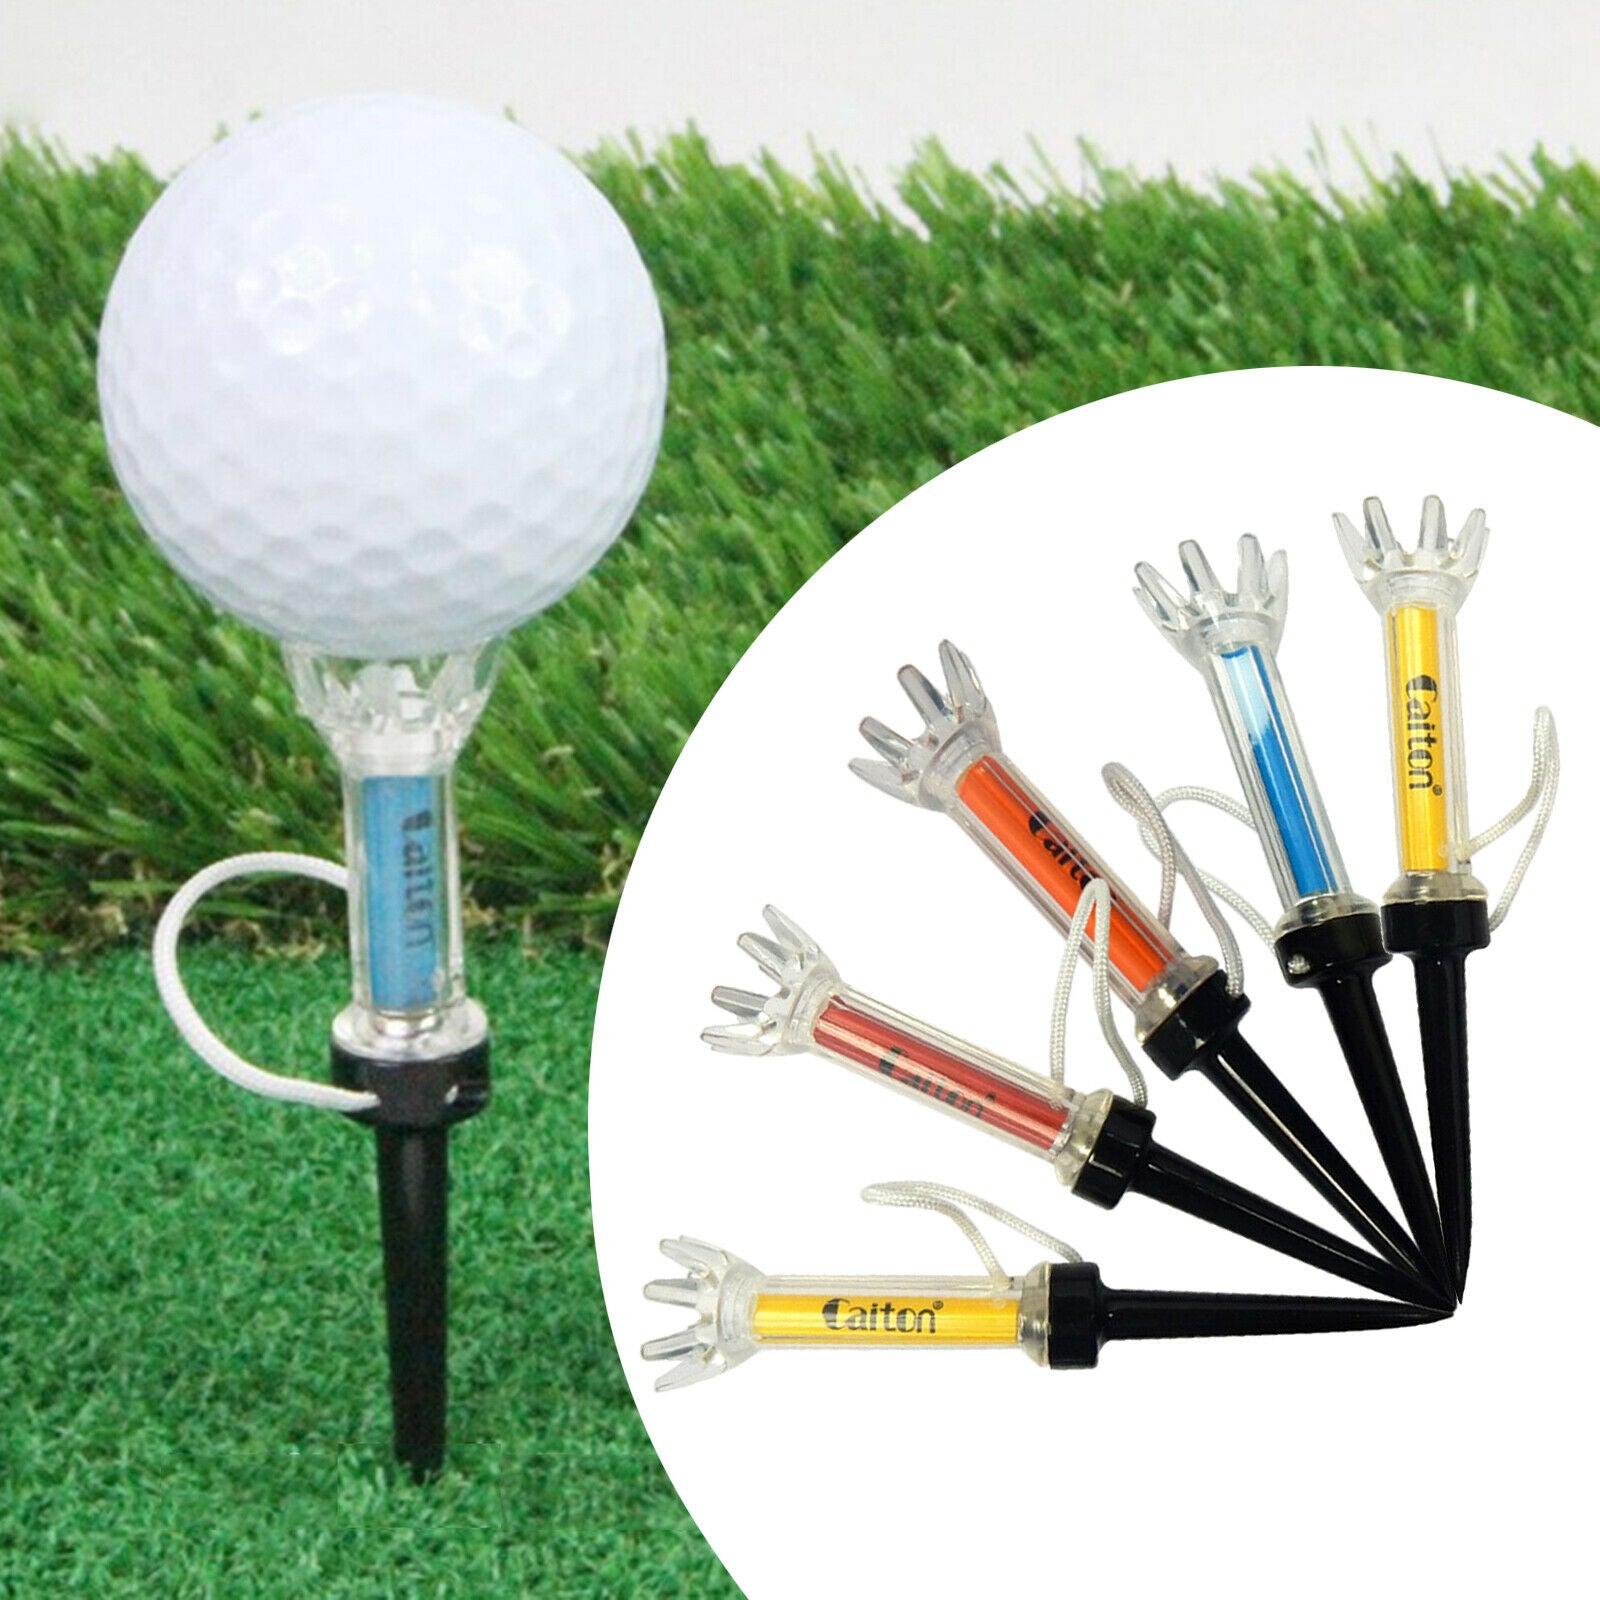 5x 90mm Plastic Magnetic Golf Tee 8 Claw Practicing Tees Golfer Training Aid